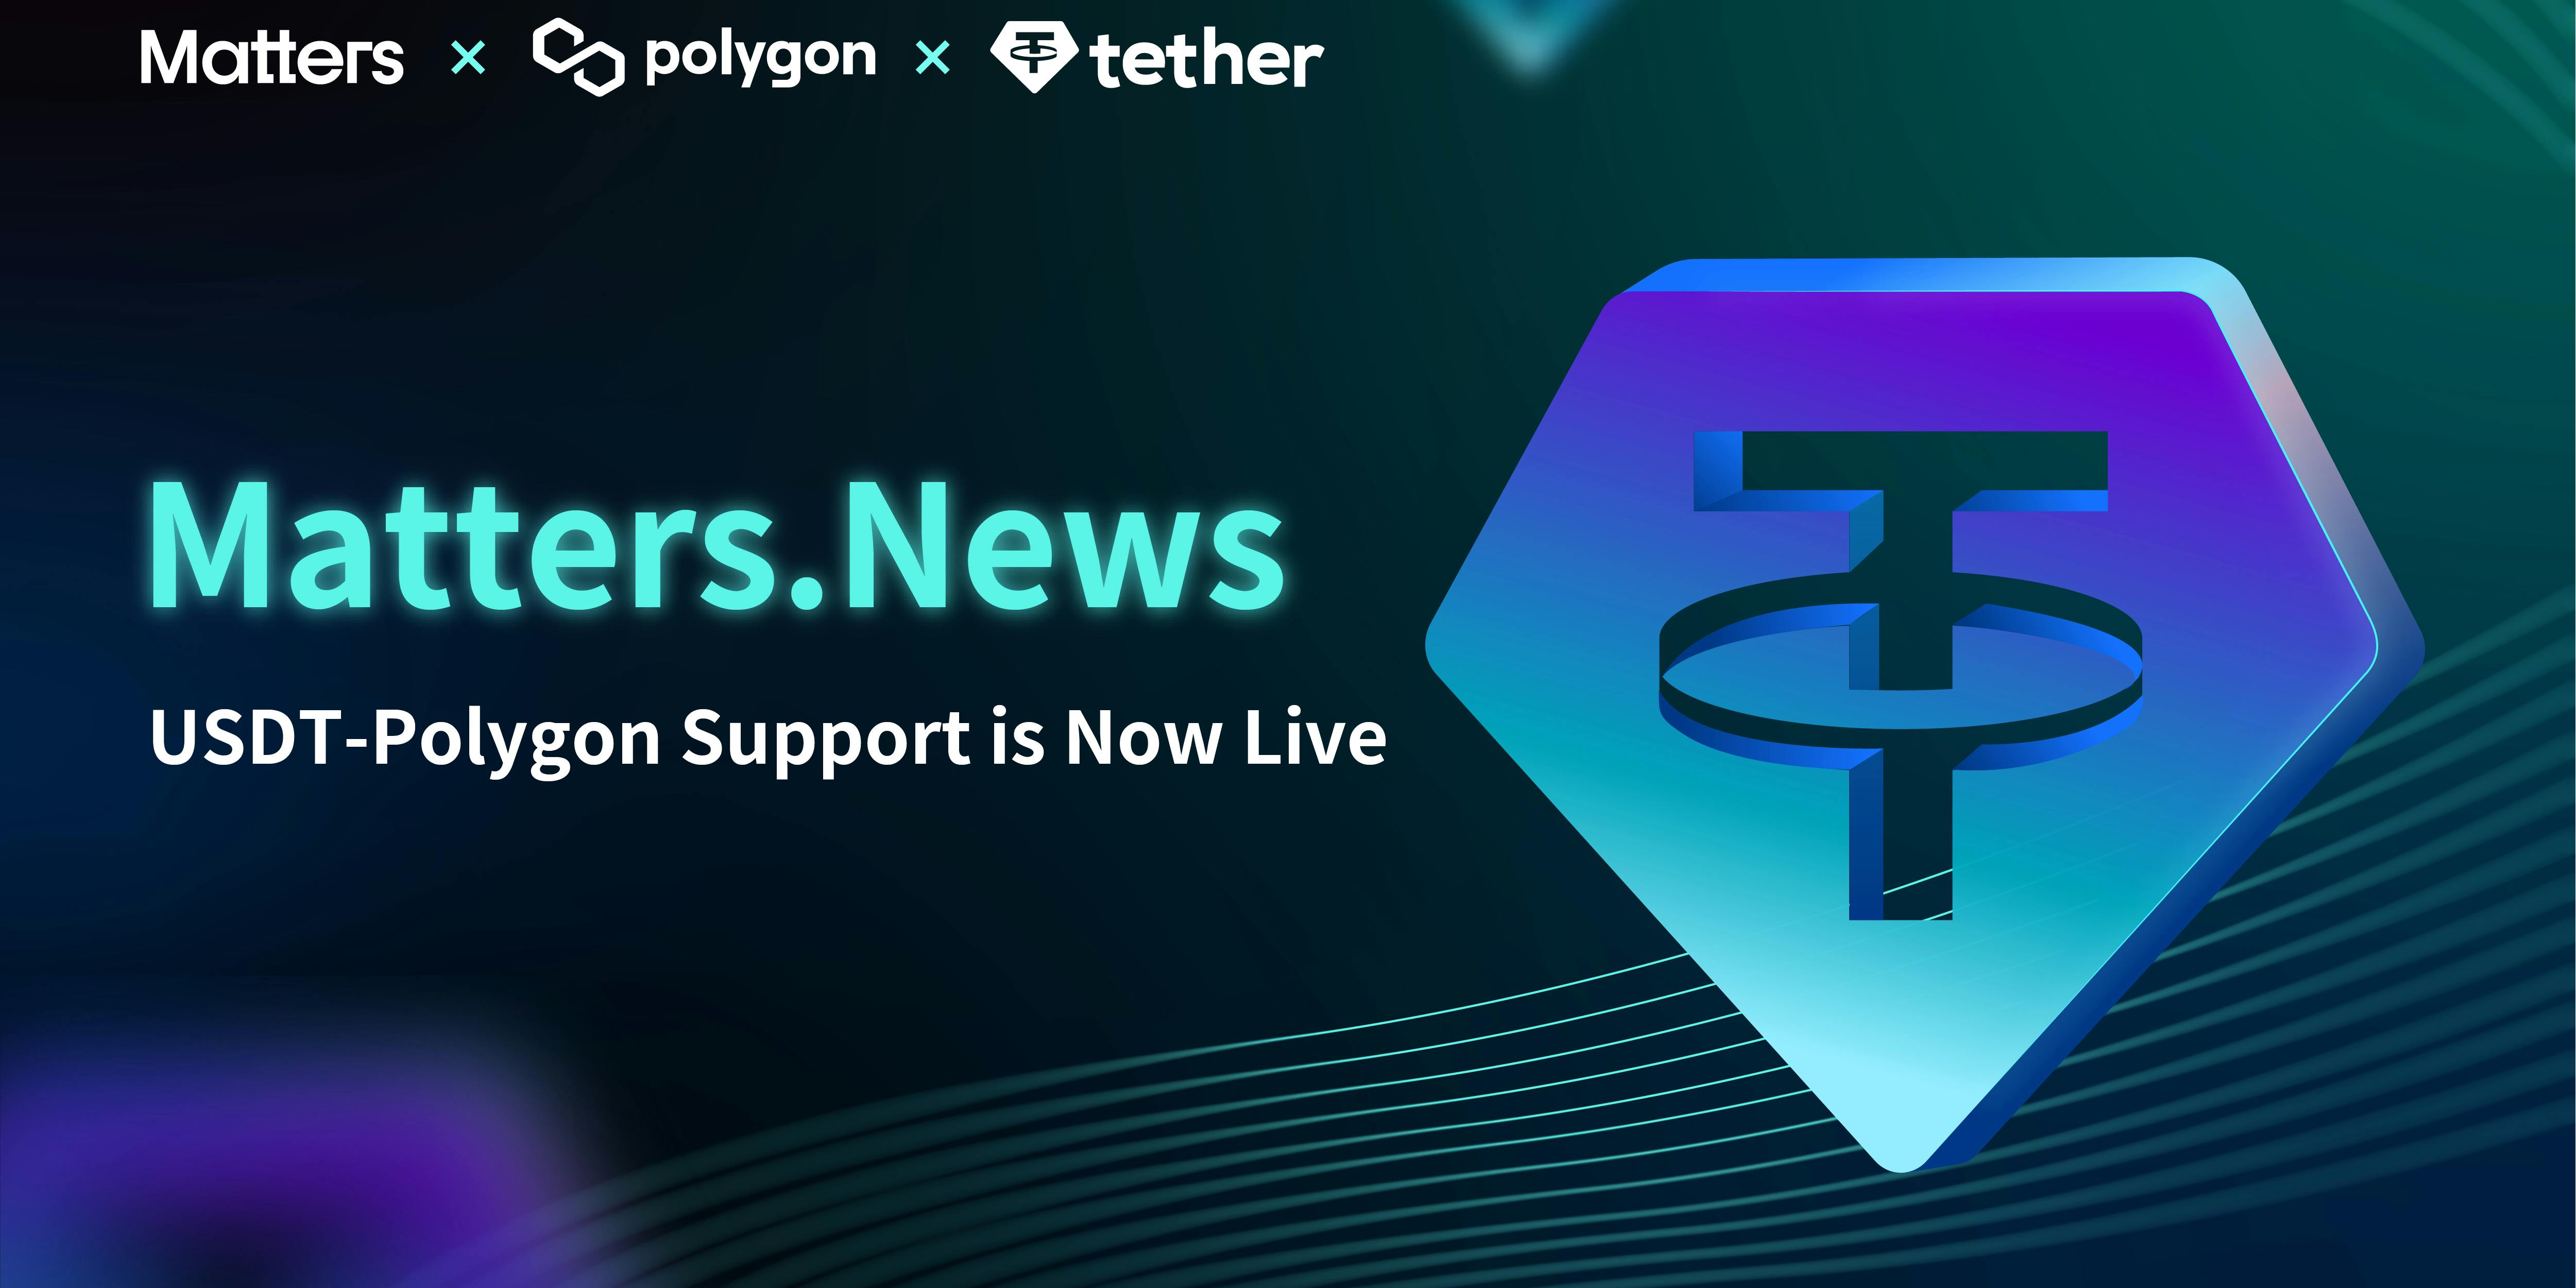 Matters.Town now support Polygon-USDT as one of the cryptocurrencies payment methods.